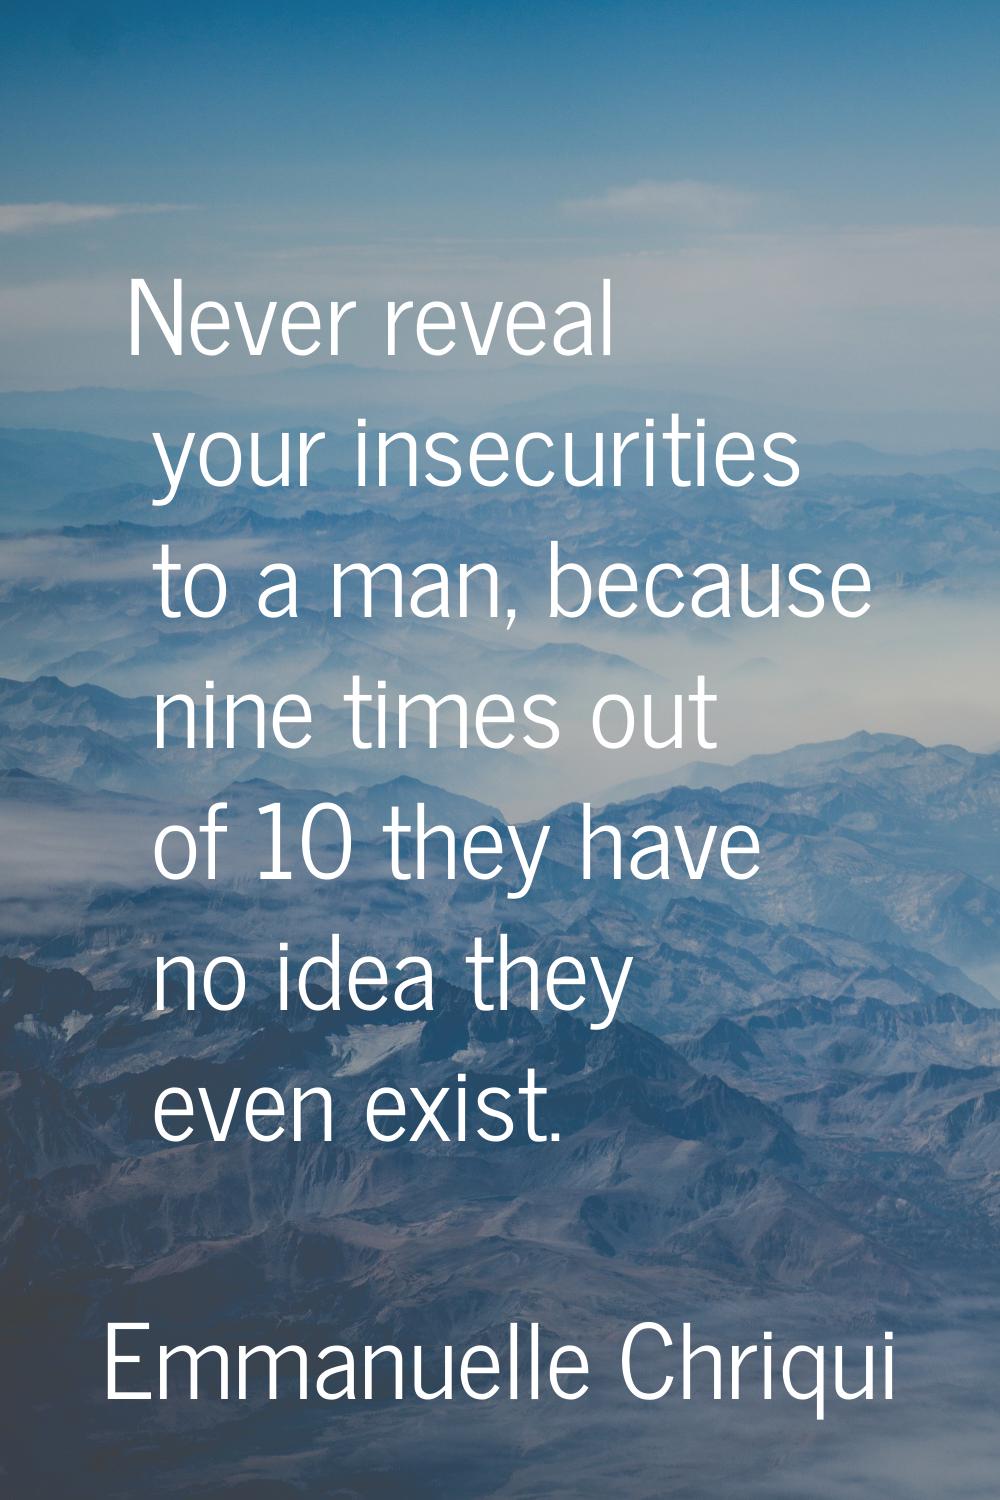 Never reveal your insecurities to a man, because nine times out of 10 they have no idea they even e